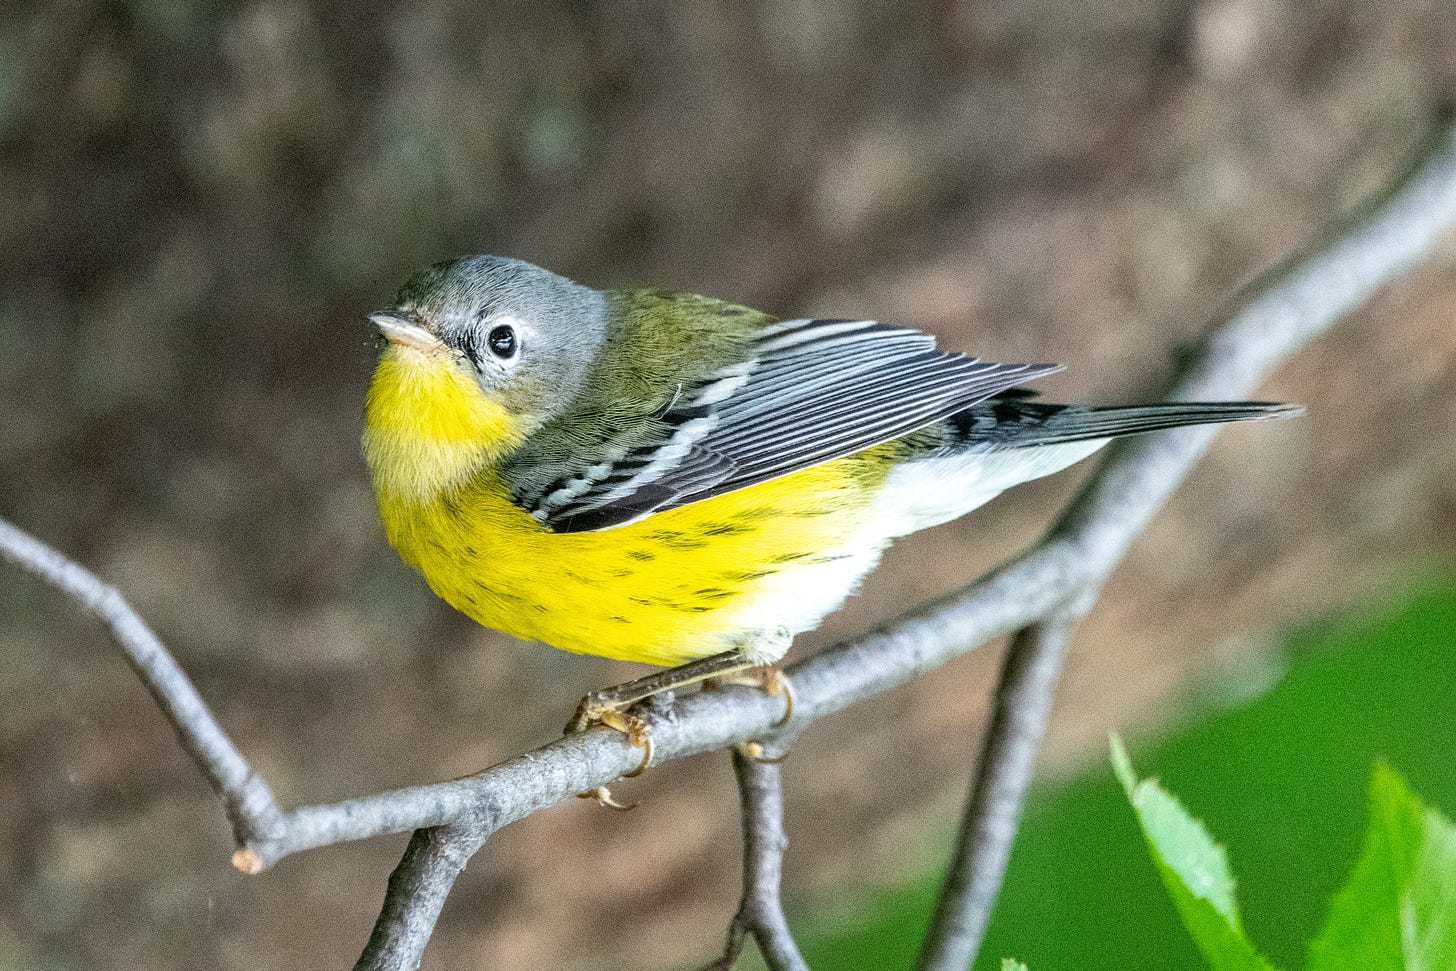 Looking upward from its perch is a small bird with a gray head, a moss-green nape, and a lemon-yellow chin and breast